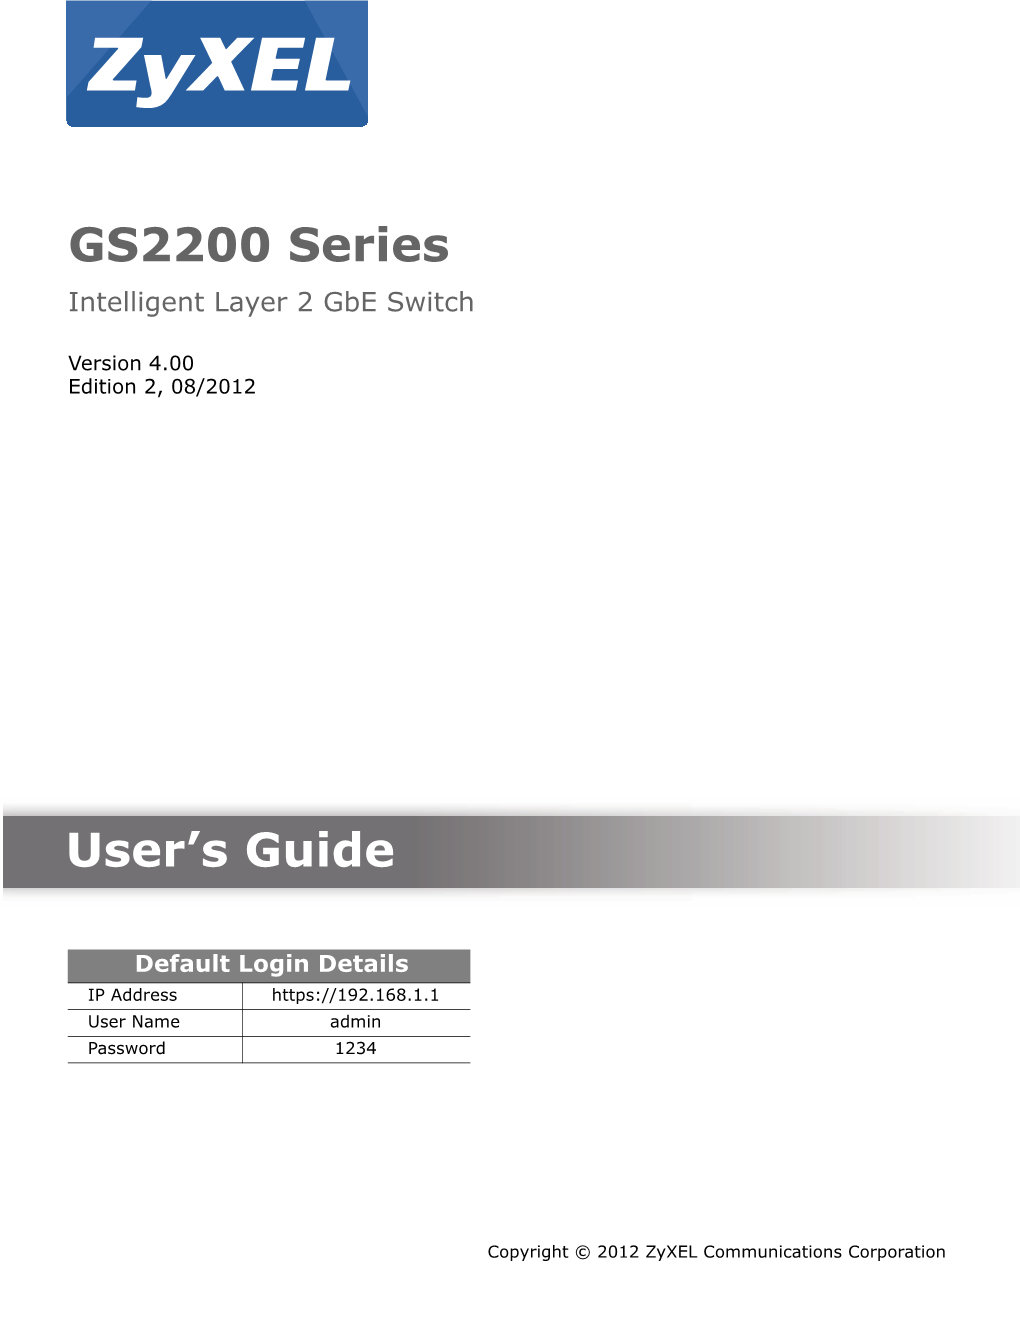 GS2200 Series User's Guide